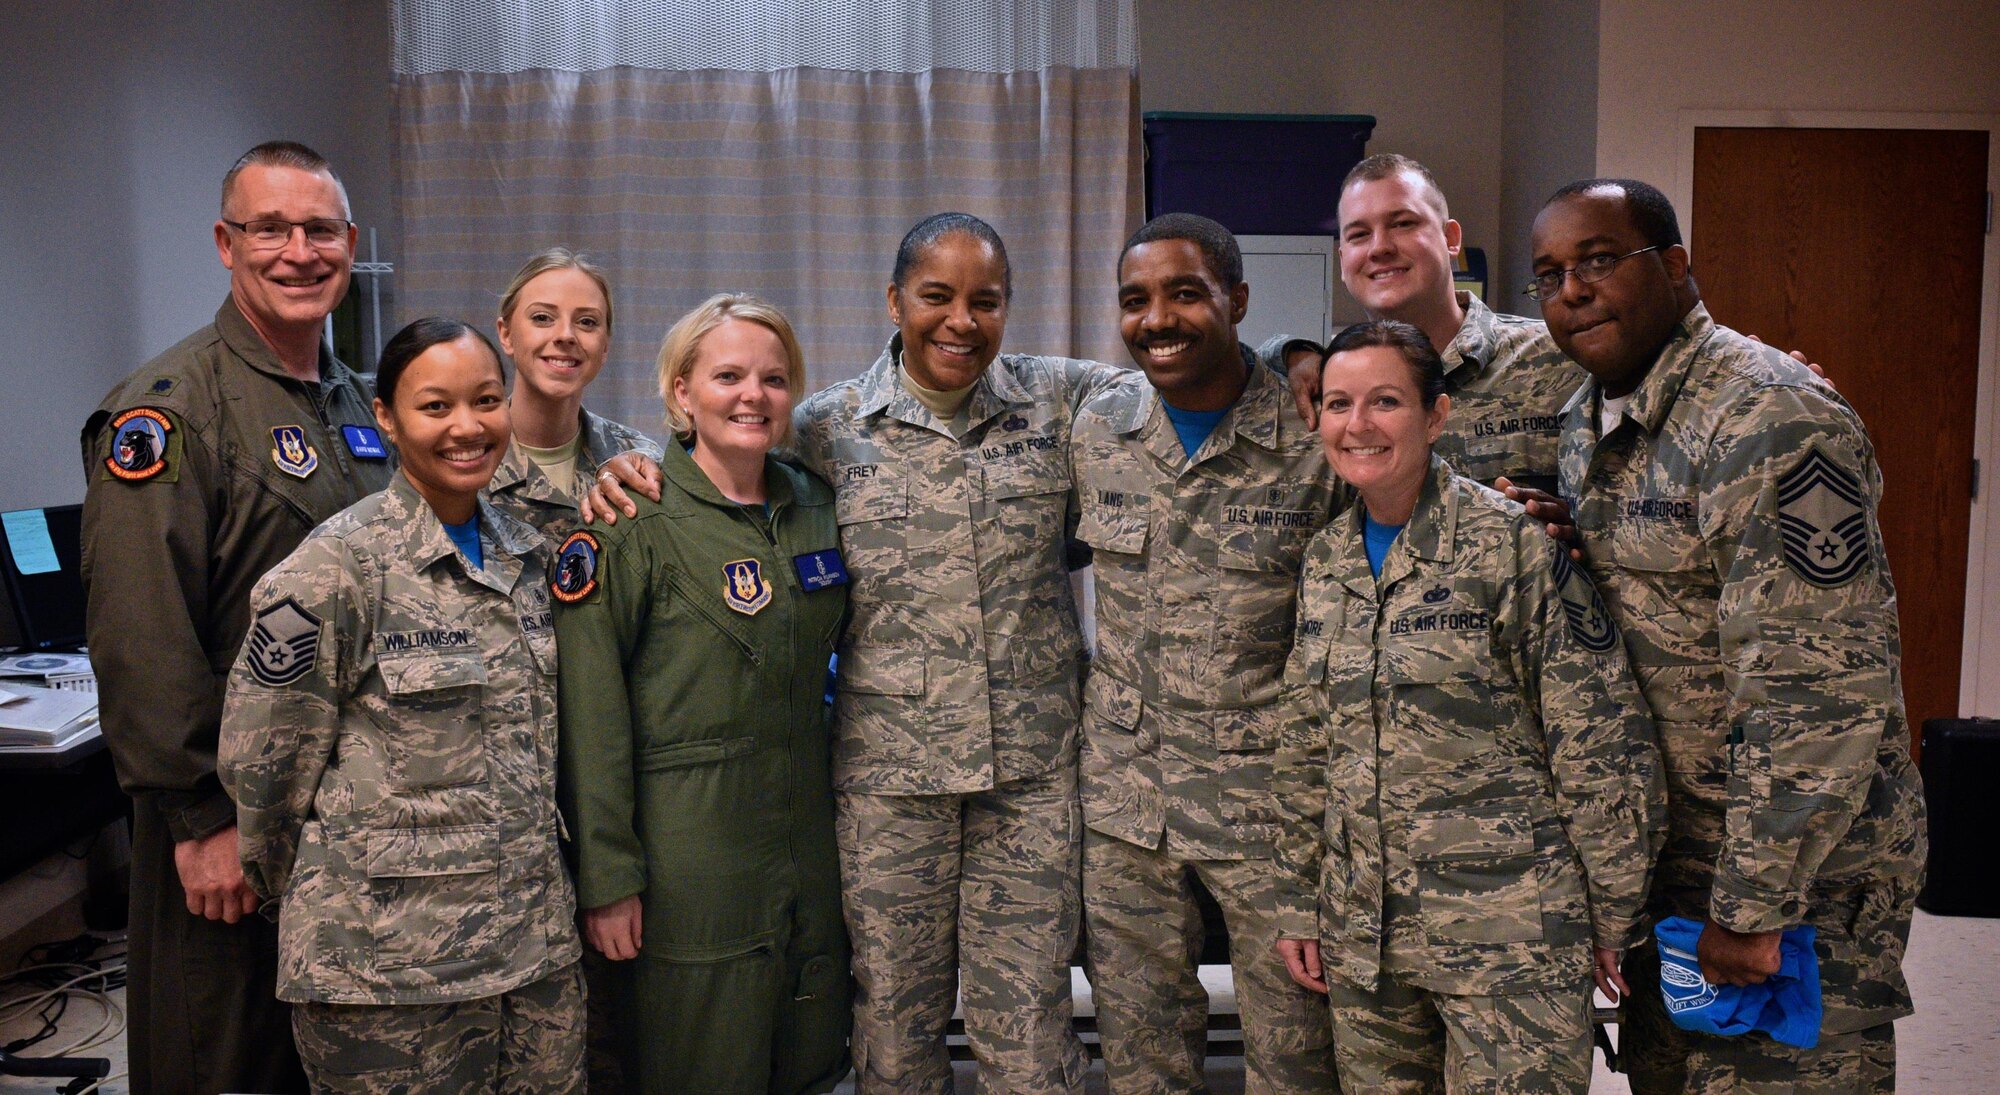 Chief Master Sgt. Shelina Frey, center, Air Mobility Command command chief, shares a photo moment April 1st, 2017 with Team Scott members from from the 932nd Medical Squadron, Scott Air Force Base, Illinois. Frey spent the day visiting the 932nd AW learning about the different squadrons that make up the Air Force Reserve Command unit located at Scott AFB.  (U.S. Air Force photo by Tech. Sgt. Christopher Parr)